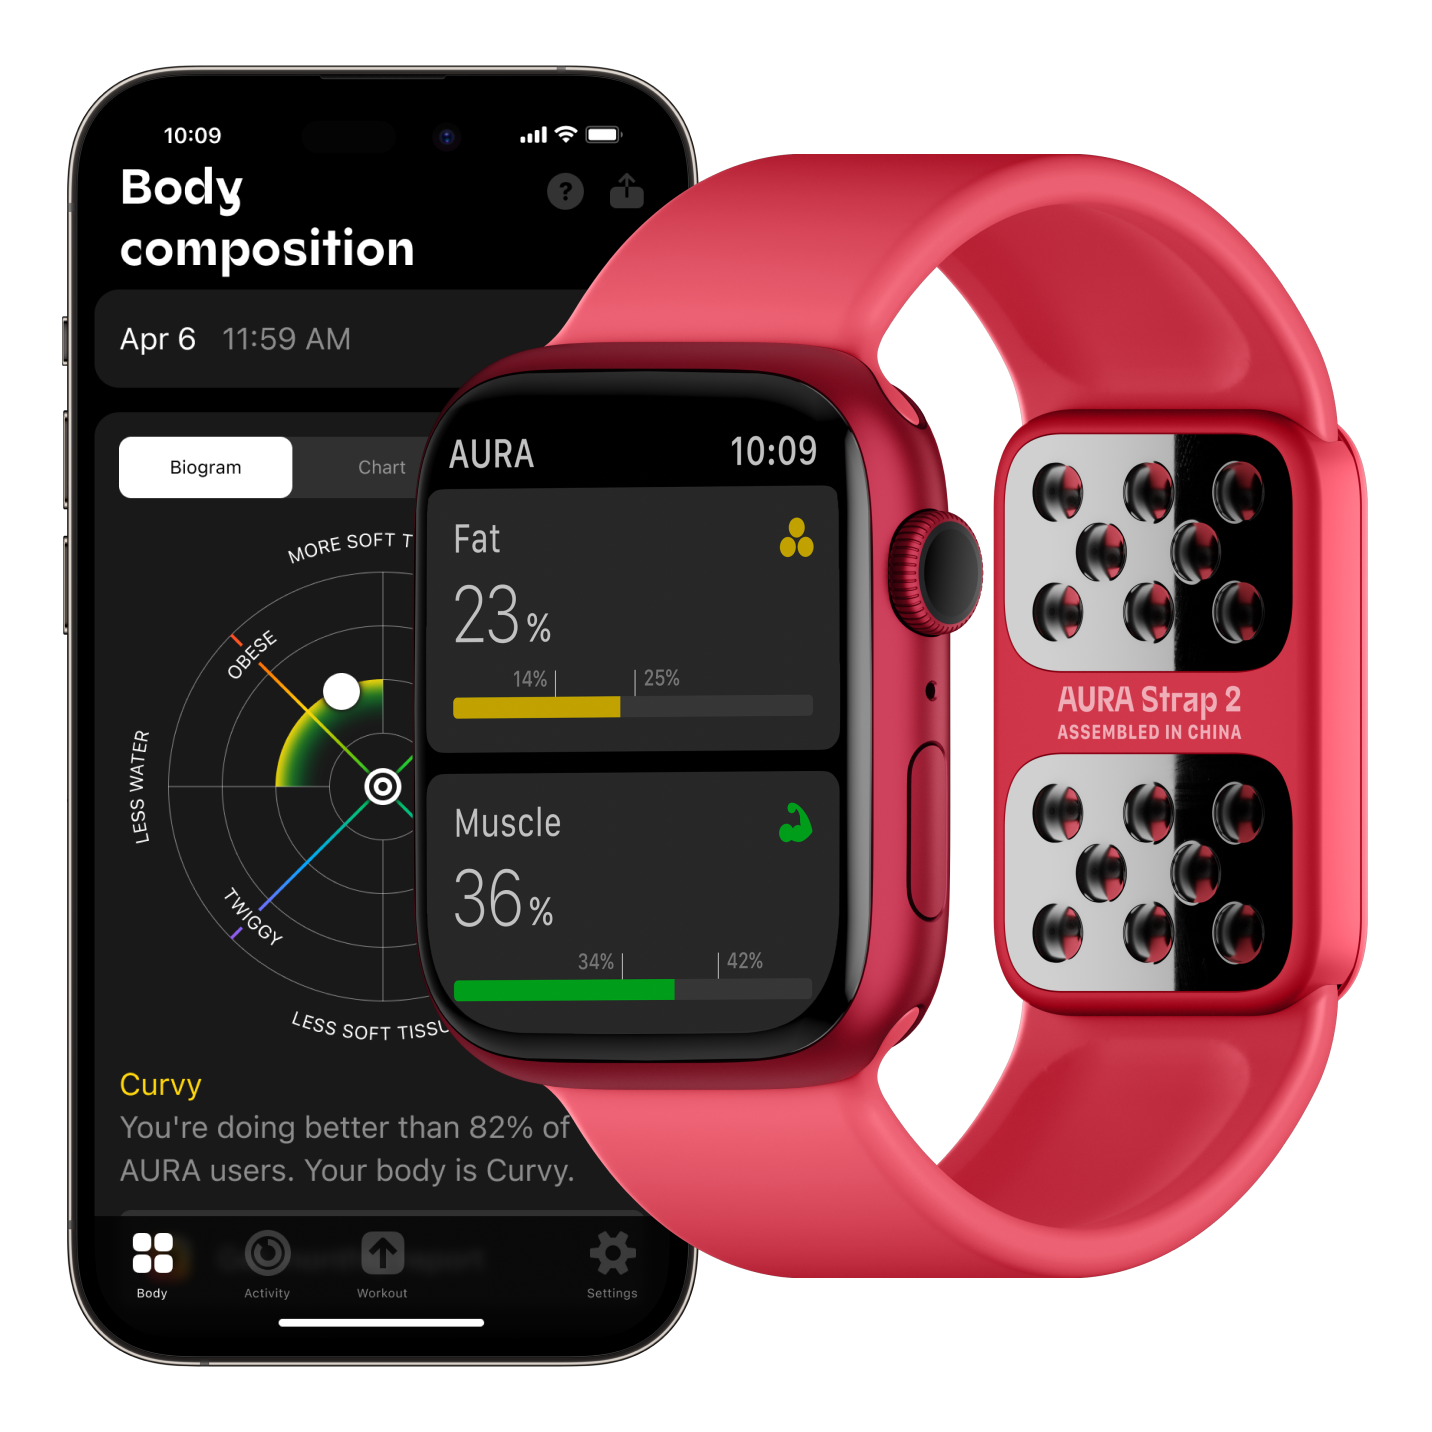 Aura Strap 2 Compatible w Apple Watch Monitor Body Fat & Weight Loss Muscle Monitoring Device w Biogram 10